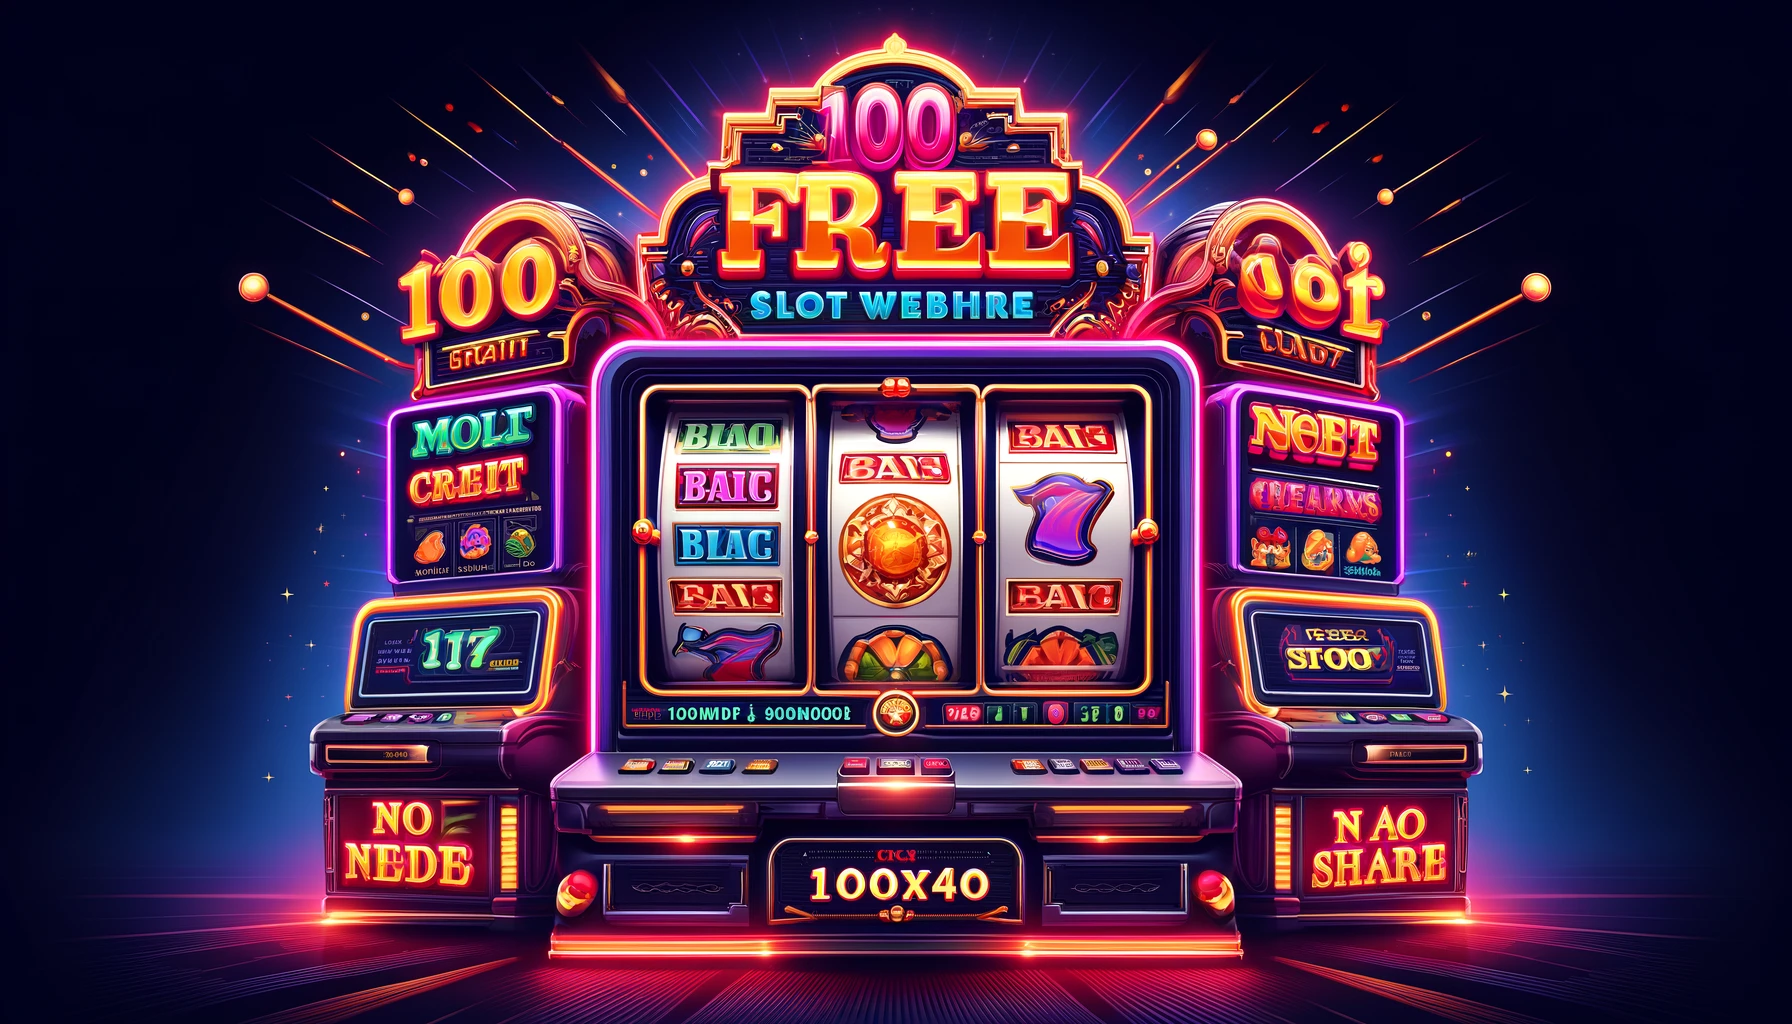 100 free credit slot website, no need to share